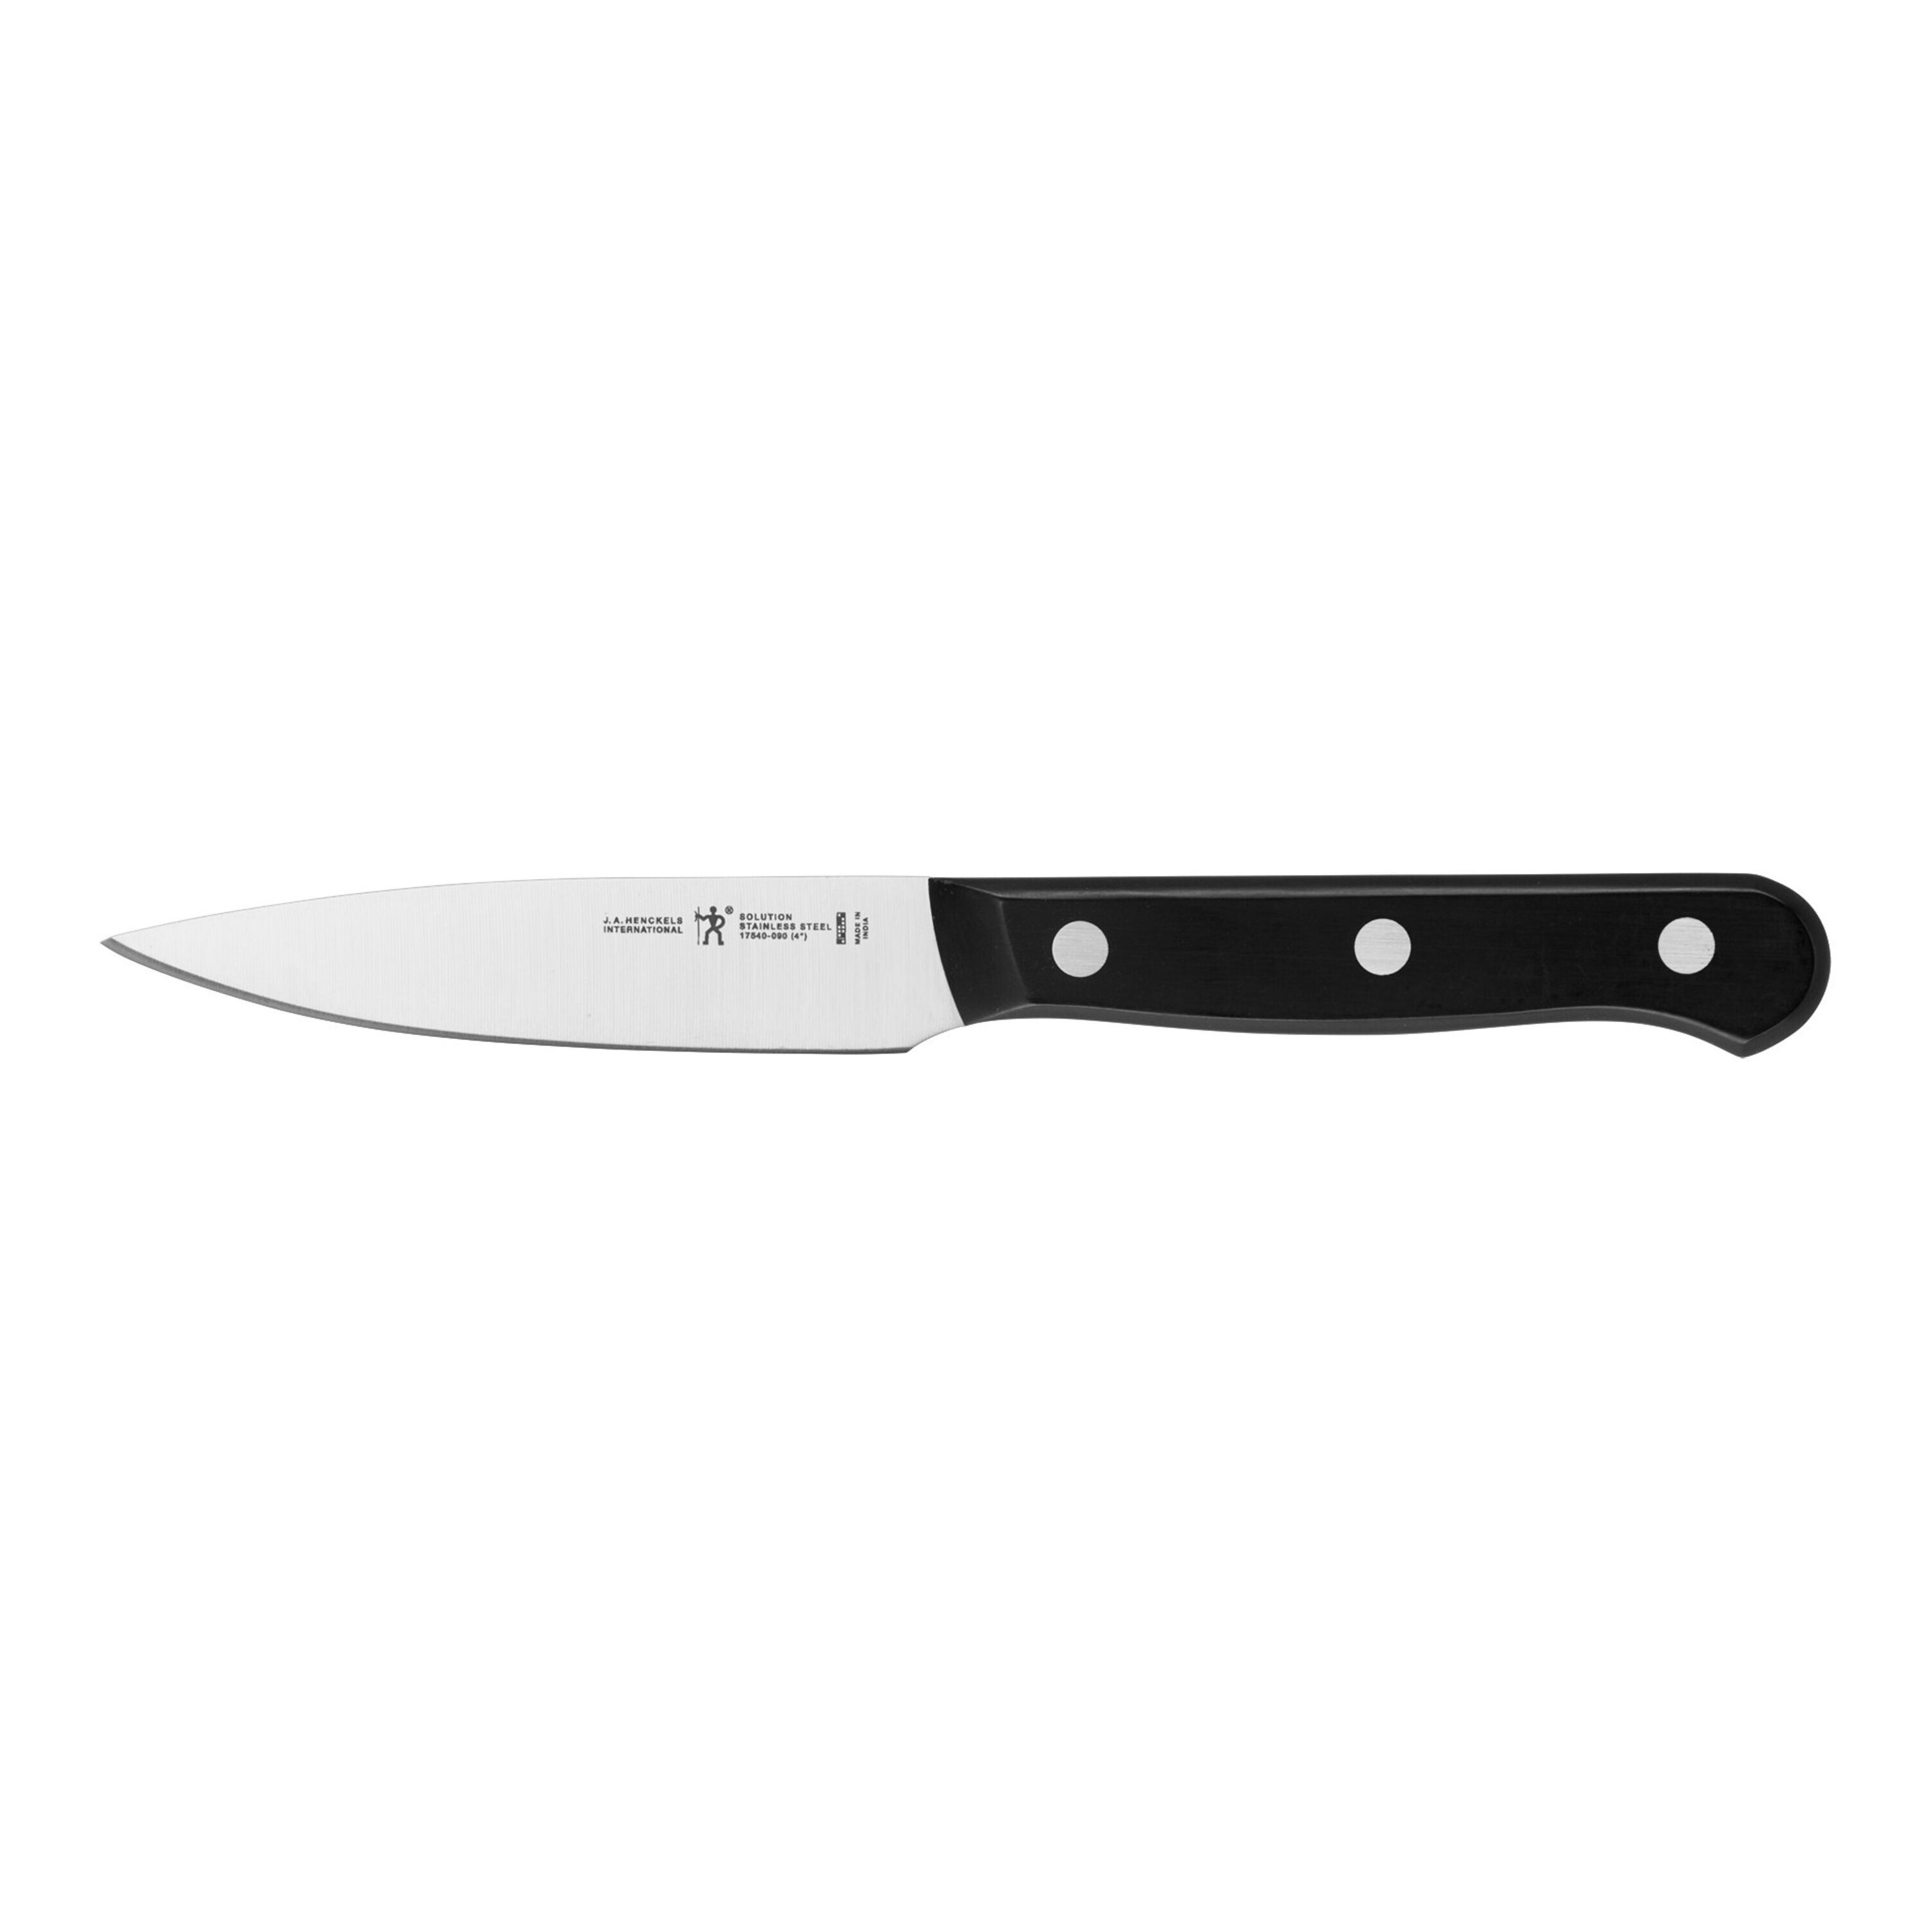 Handy Housewares 10-Inch Curved Stainless Steel Blade Chopping Knife with Double Wooden Handles